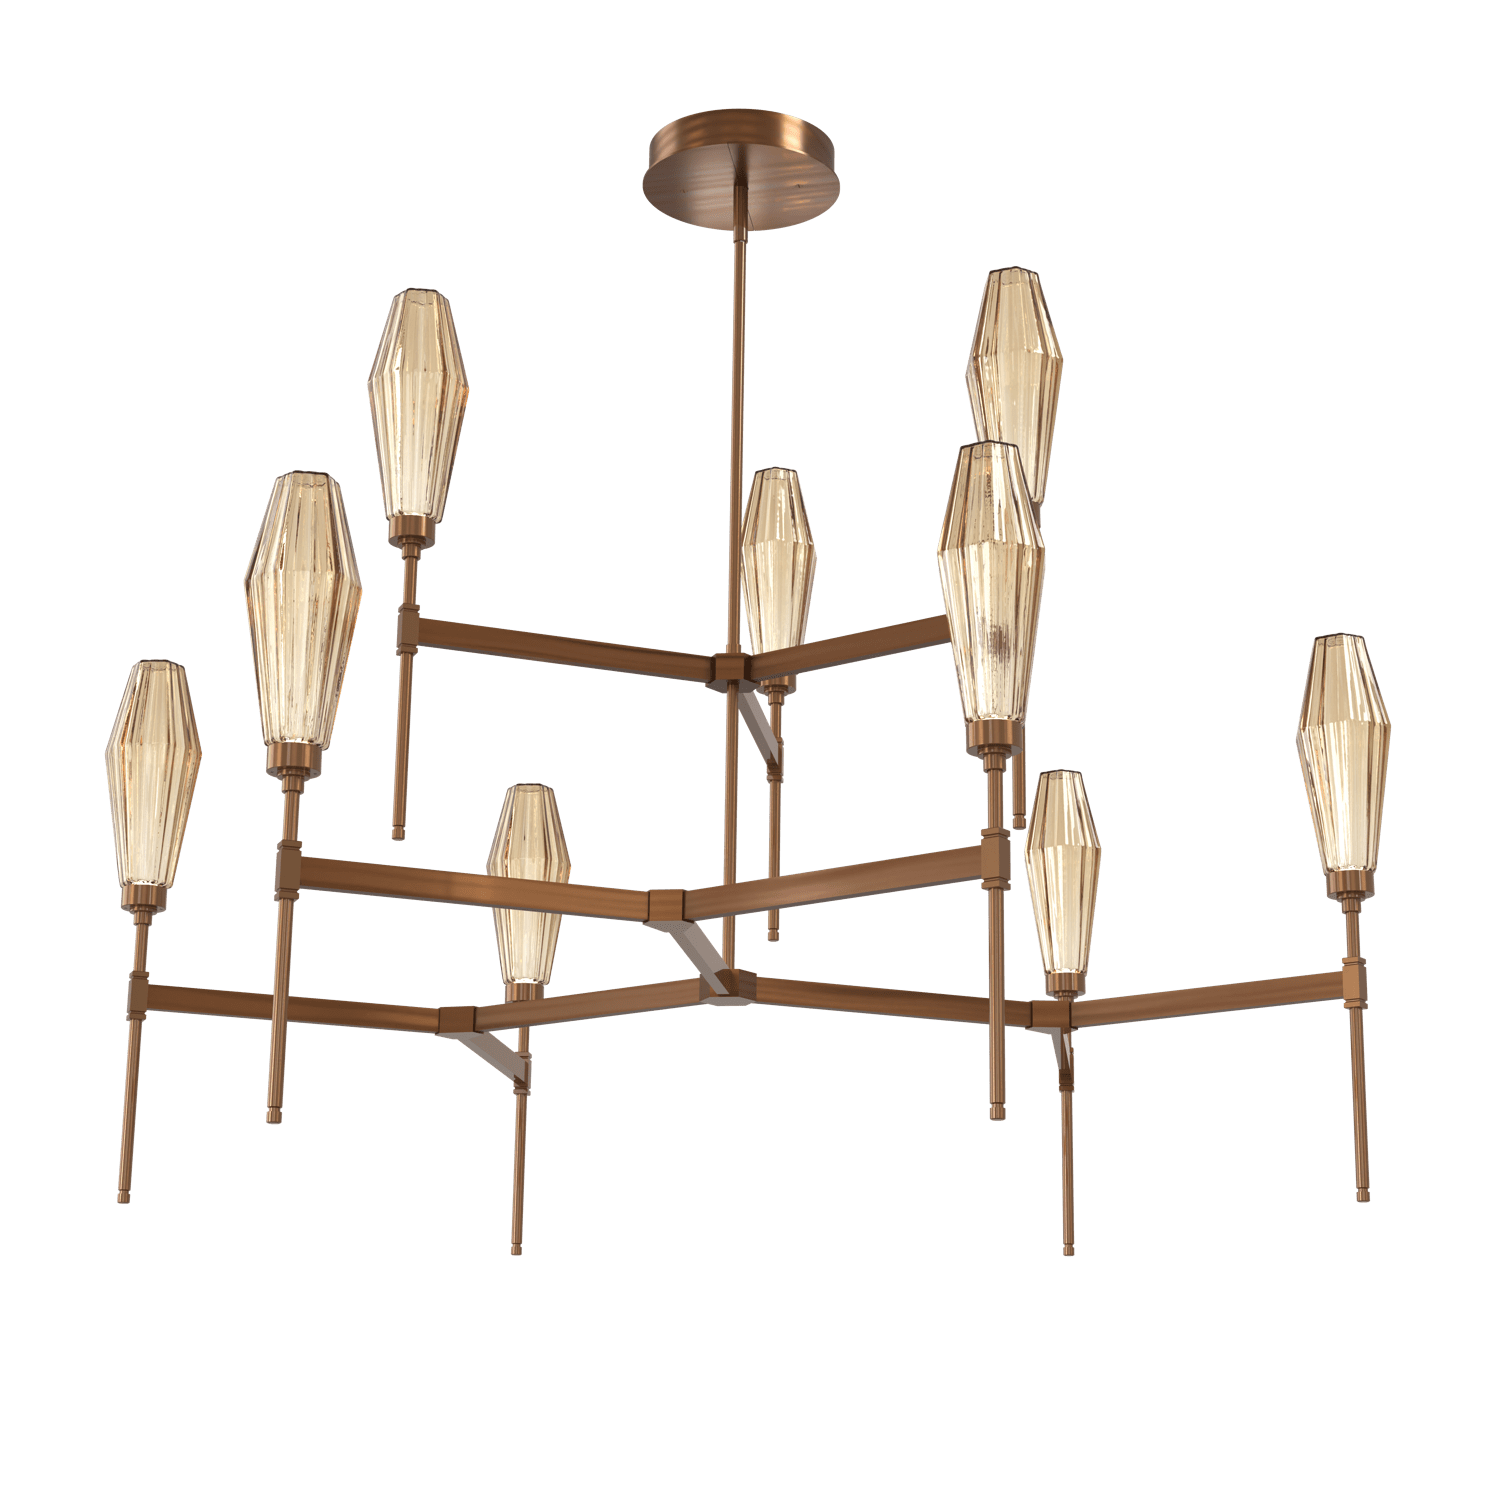 CHB0049-54-RB-RB-Hammerton-Studio-Aalto-54-inch-round-two-tier-belvedere-chandelier-with-oil-rubbed-bronze-finish-and-optic-ribbed-bronze-glass-shades-and-LED-lamping